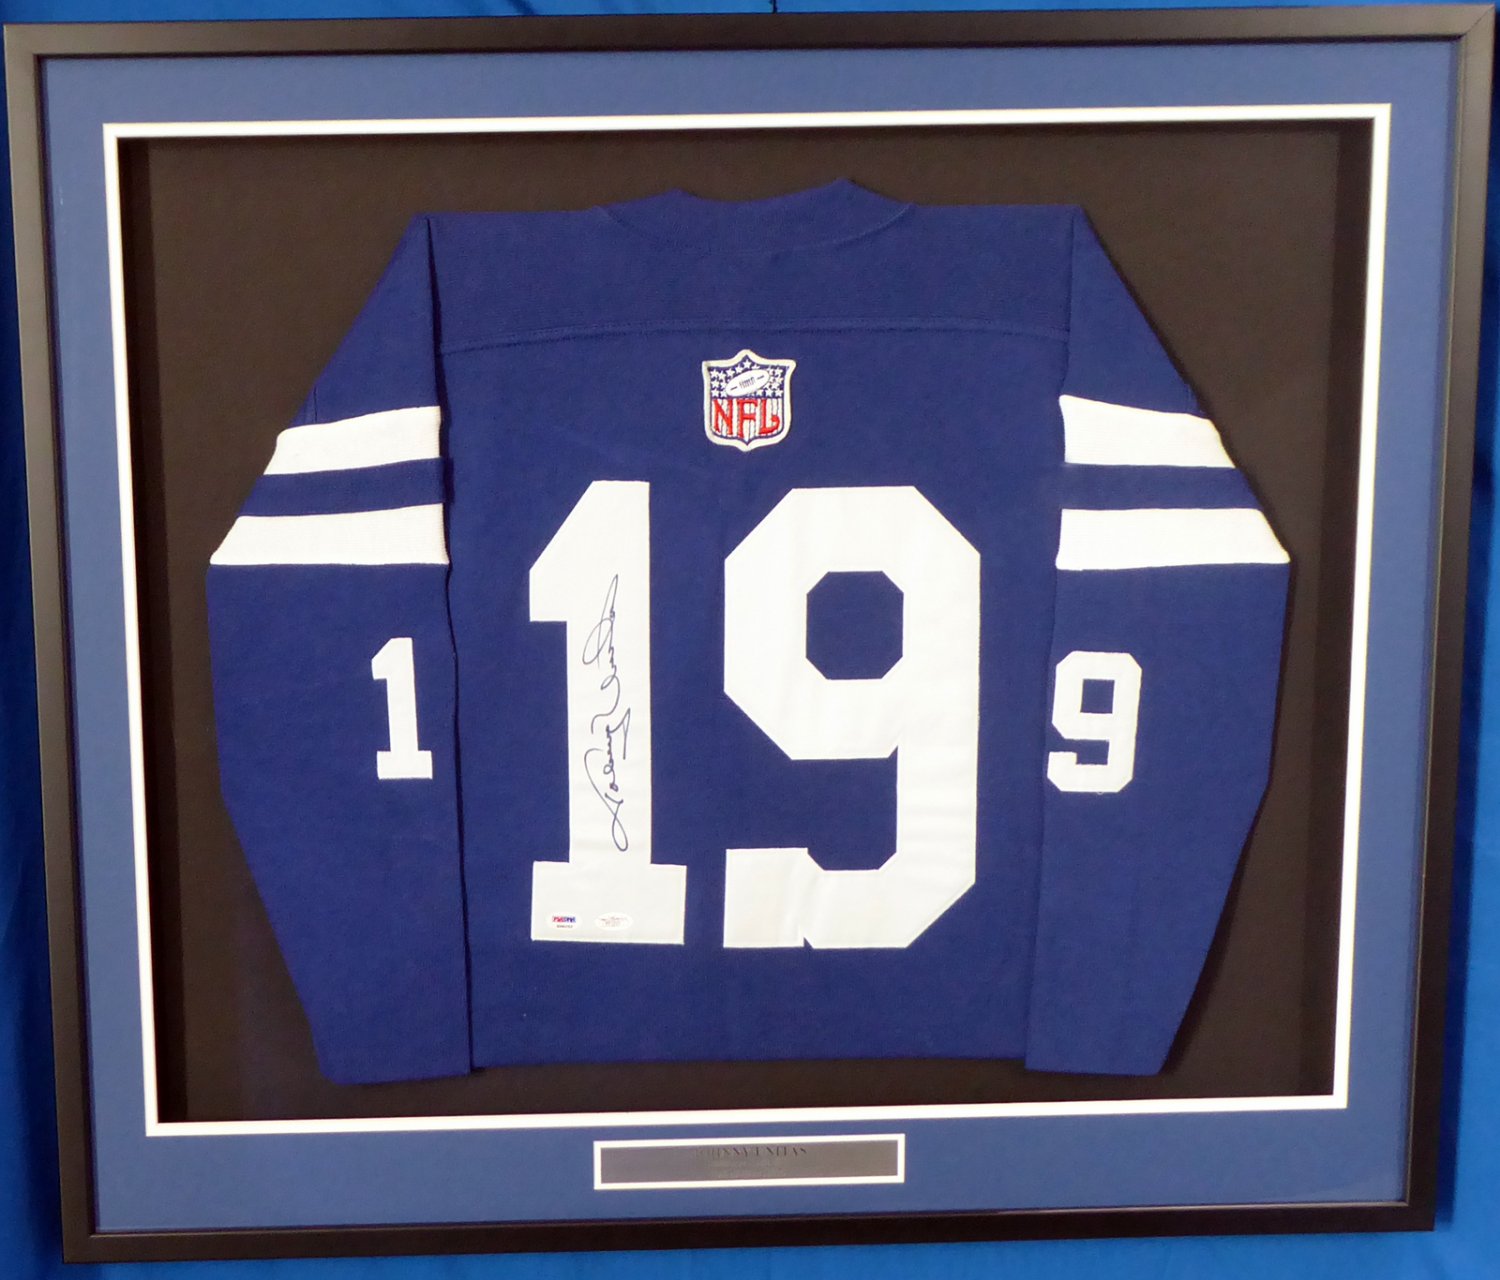 baltimore colts jersey